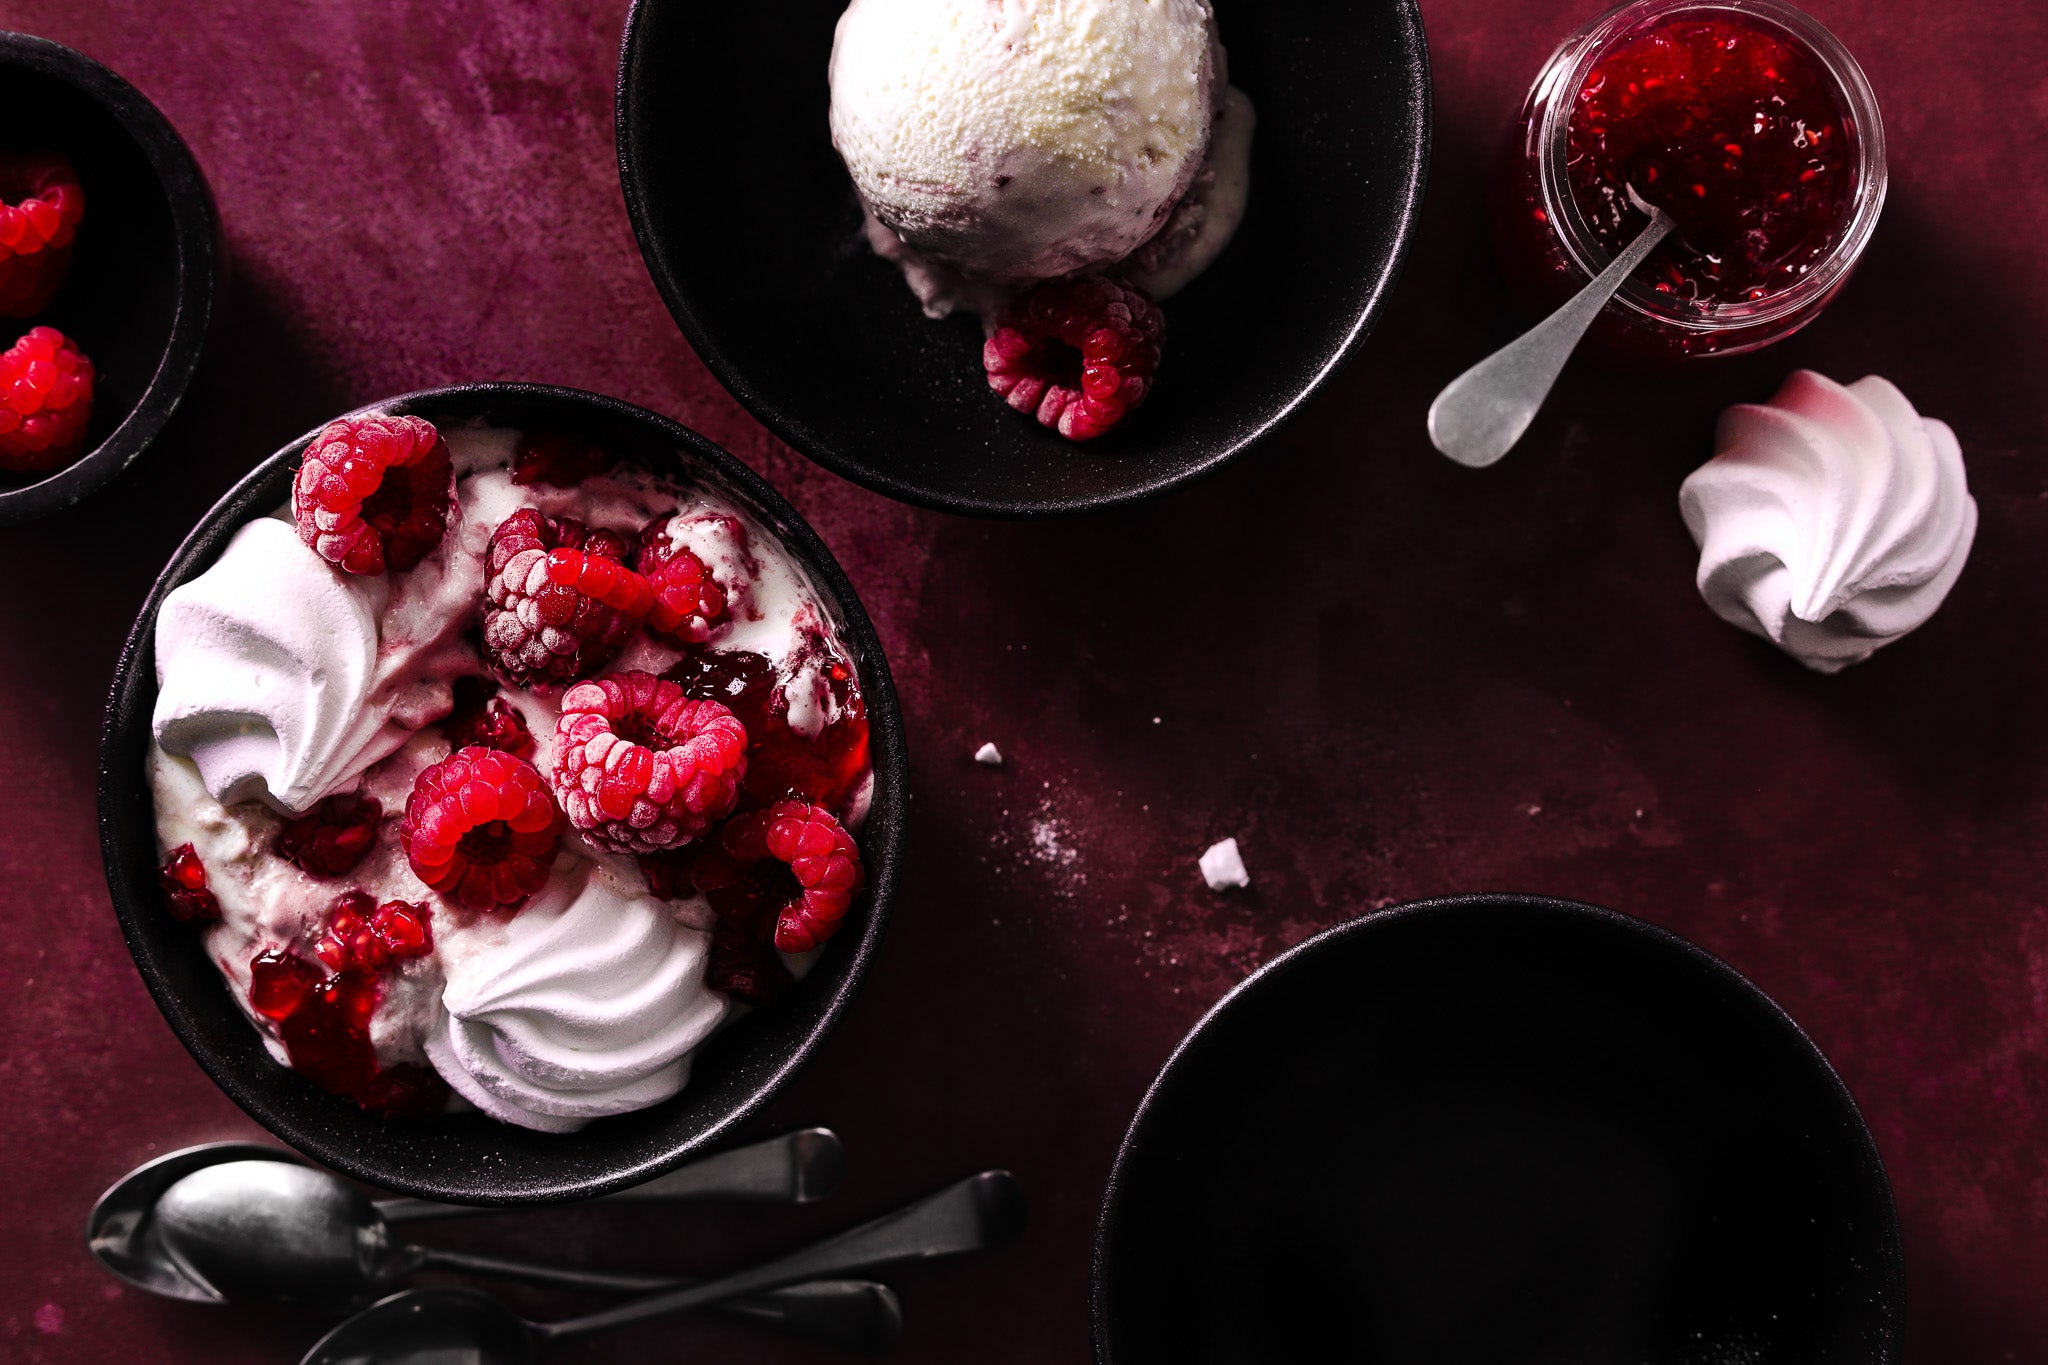 1 subject shot 5 ways - using colour theory in food photography through backdrops